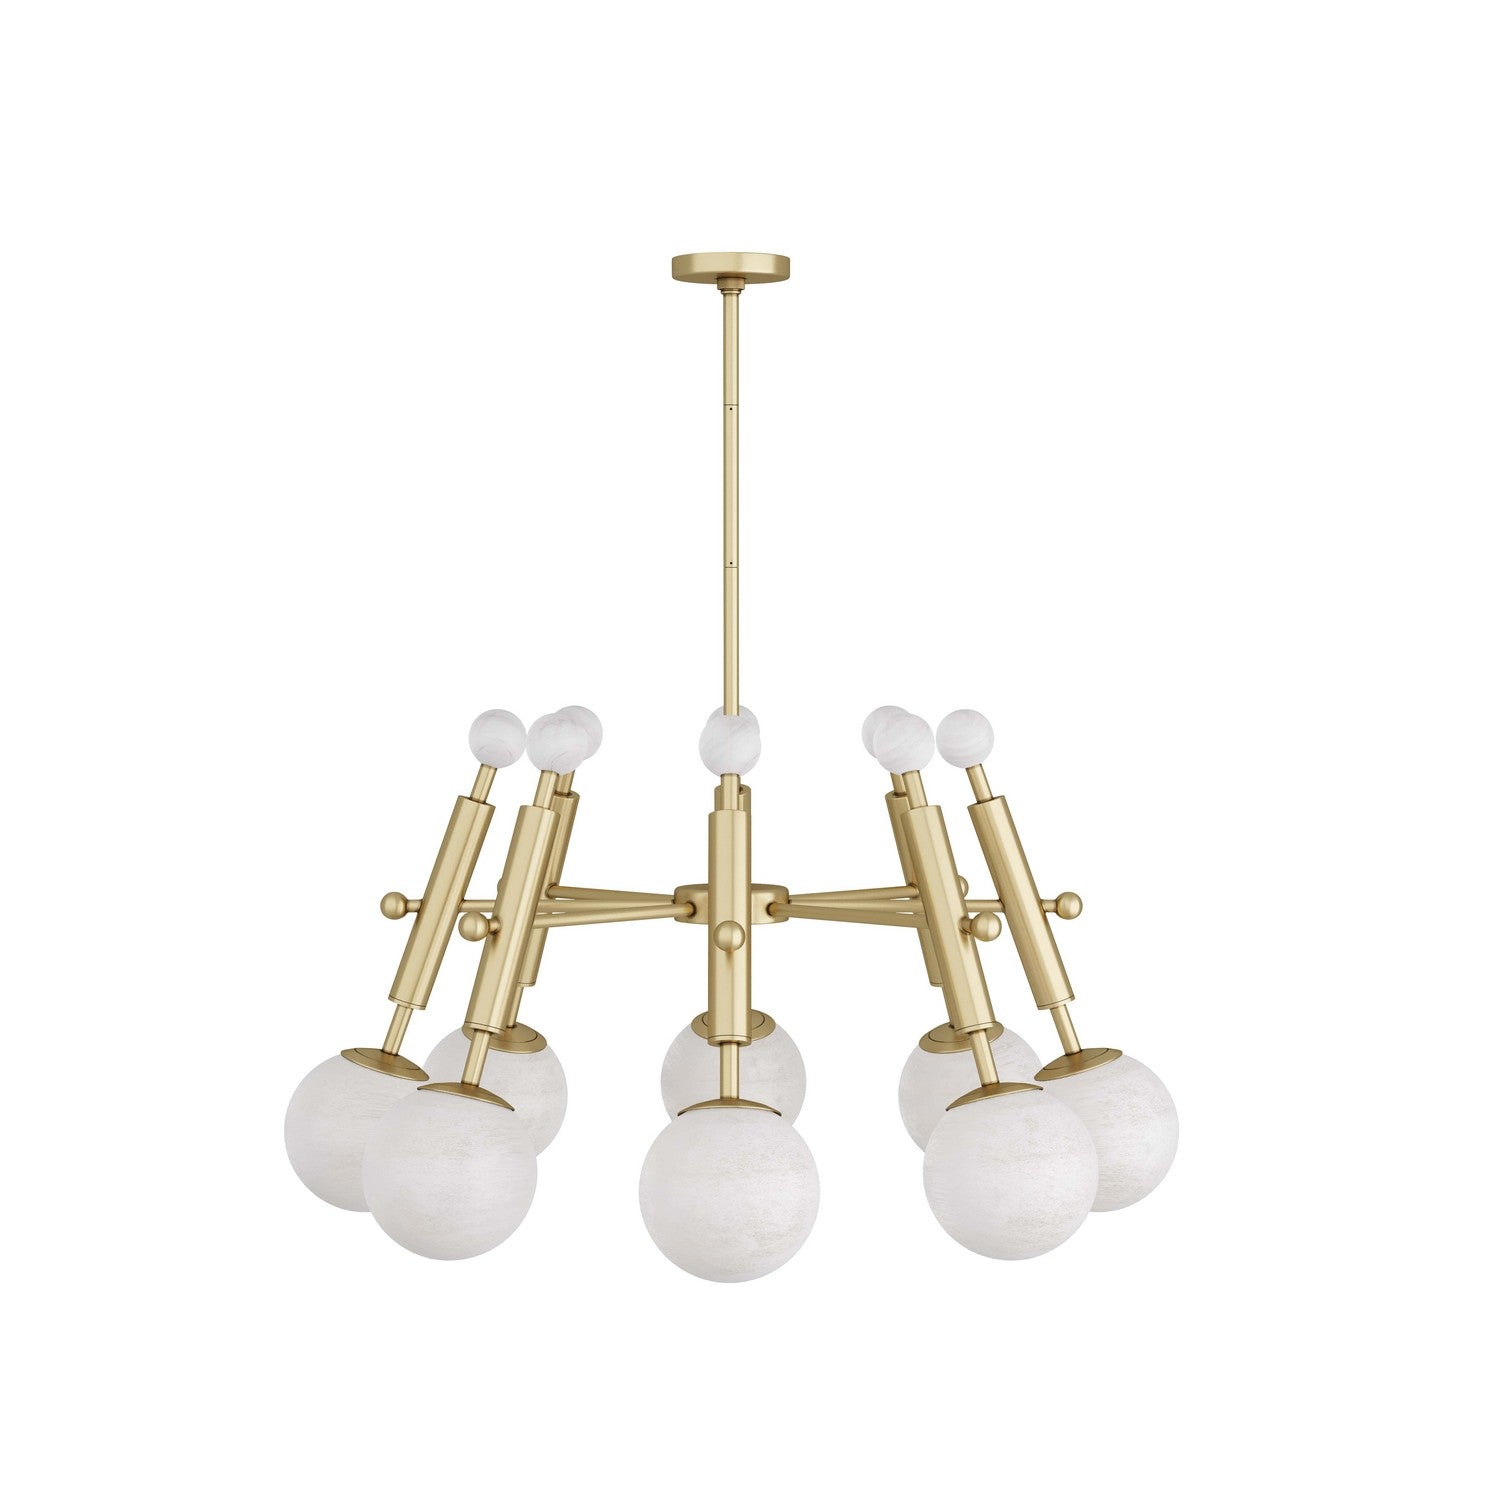 Eight Light Chandelier from the Verona collection in Antique Brass finish